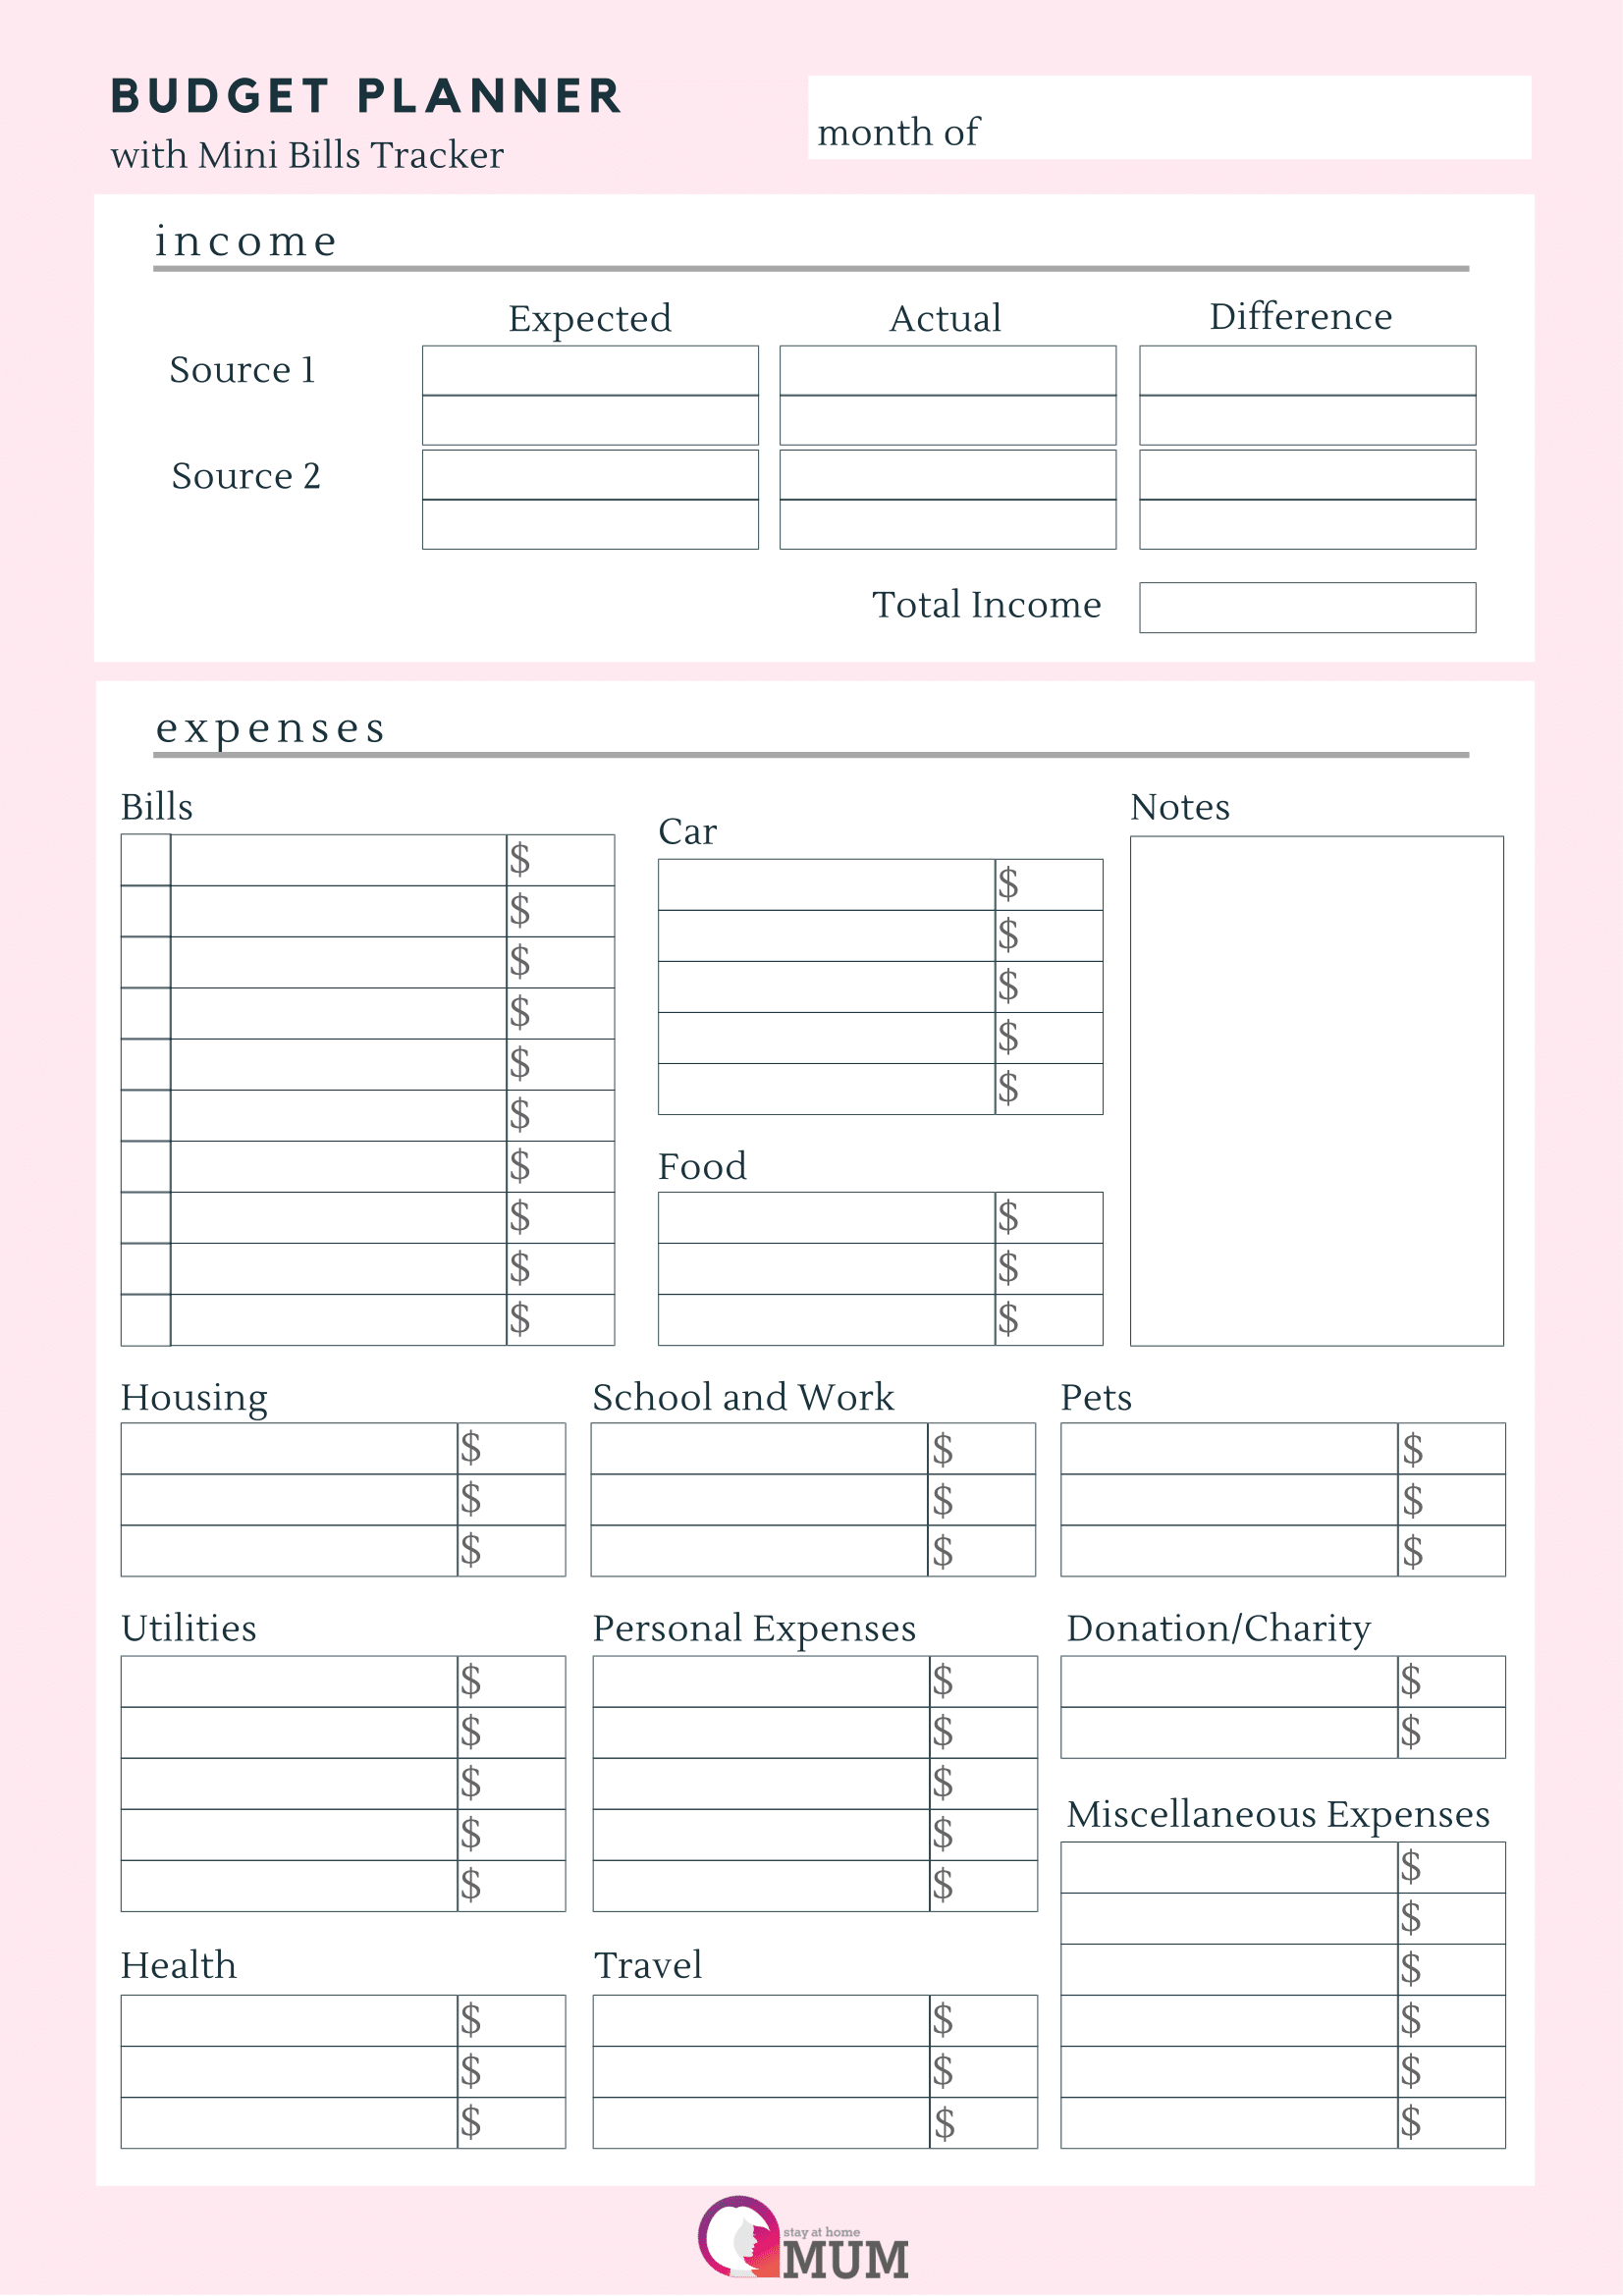 Budget Planner With Mini Bills Tracker - Stay At Home Mum | Articles - Free Printable Budget Planner